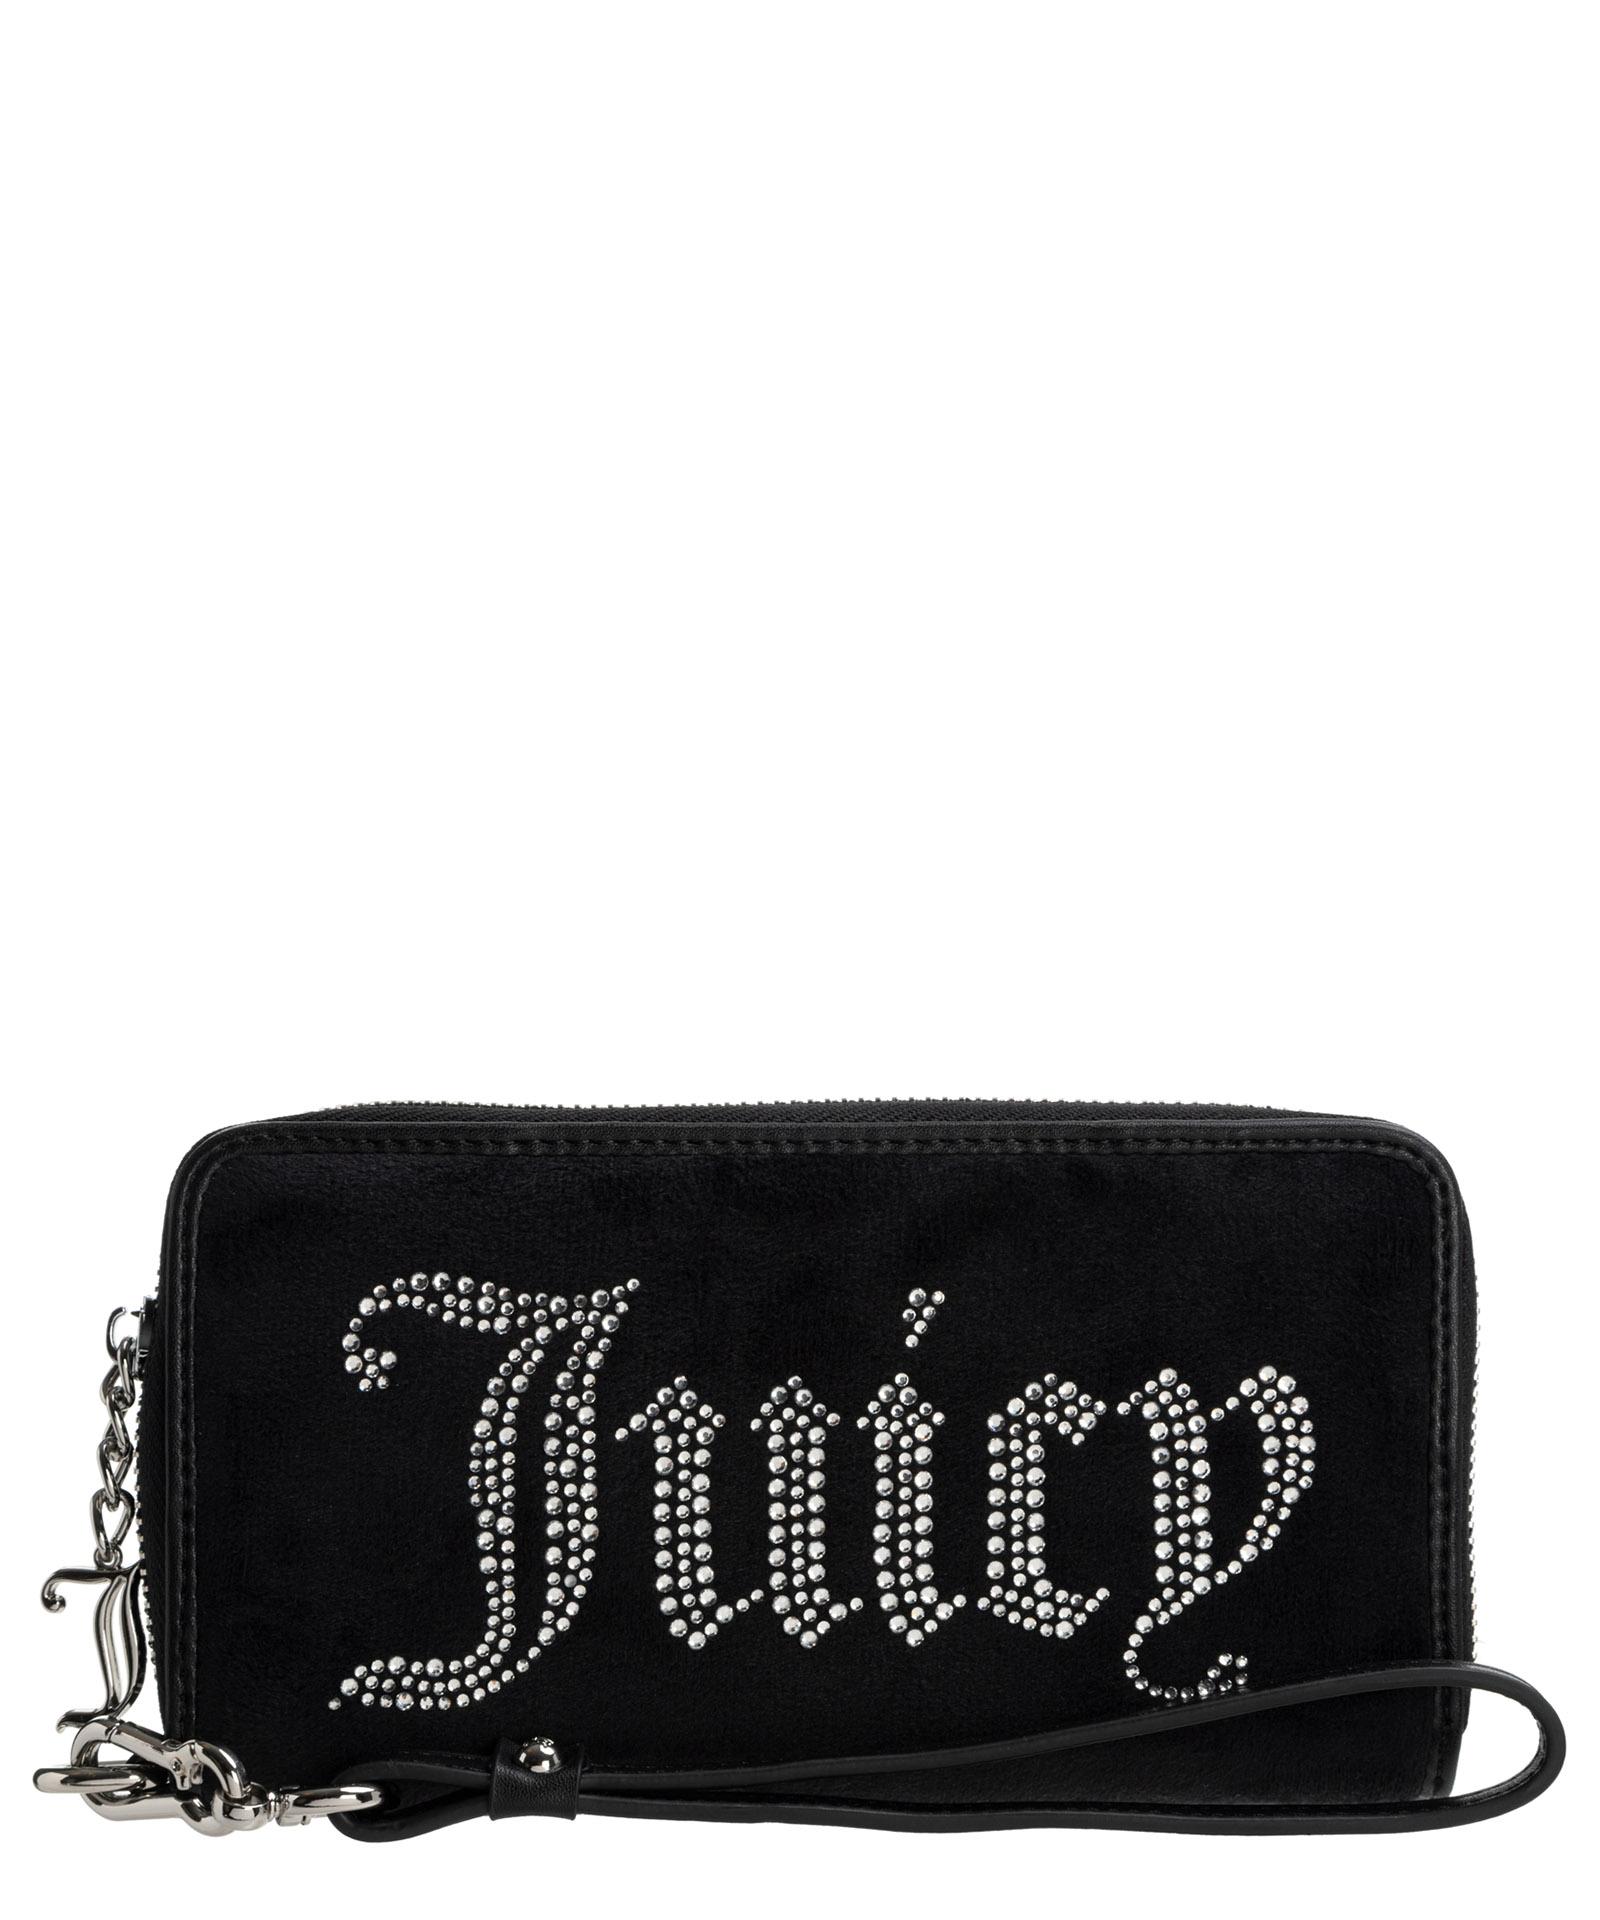 Juicy Couture Twig Strass Wallet in Black | Lyst